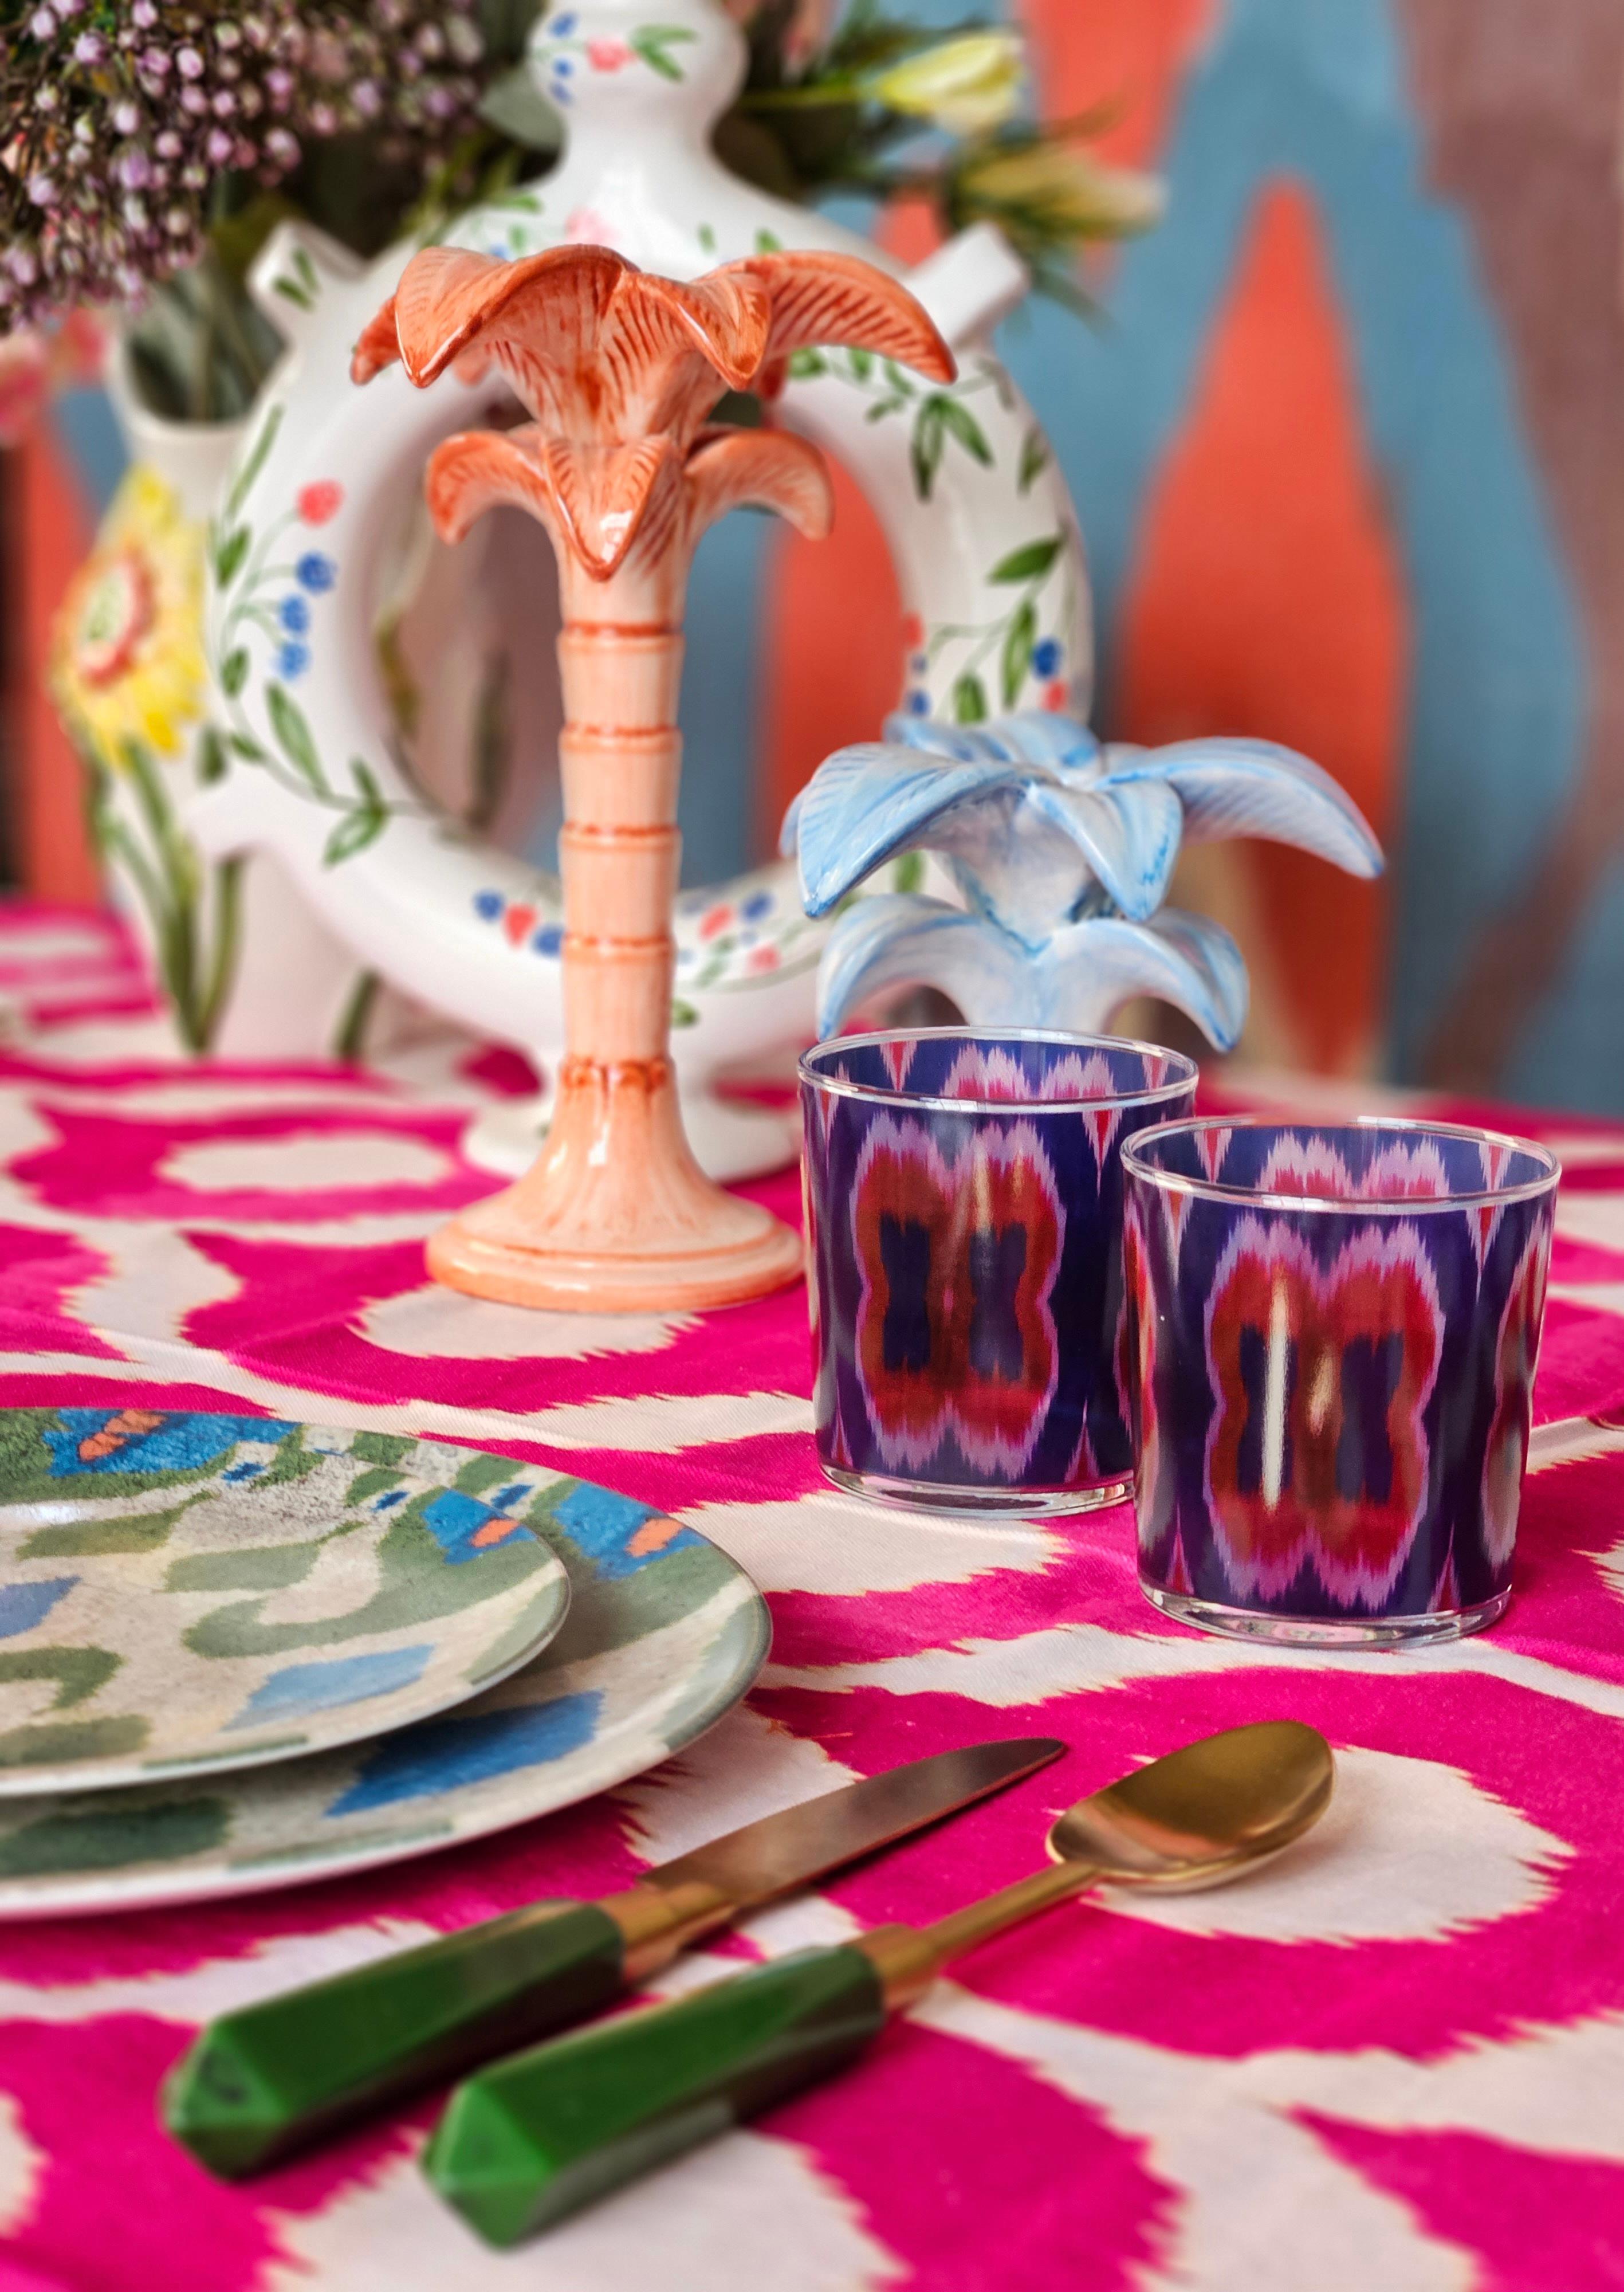 beautiful ikat glass set
is a magnificent set to light upt and give some colors to your tables